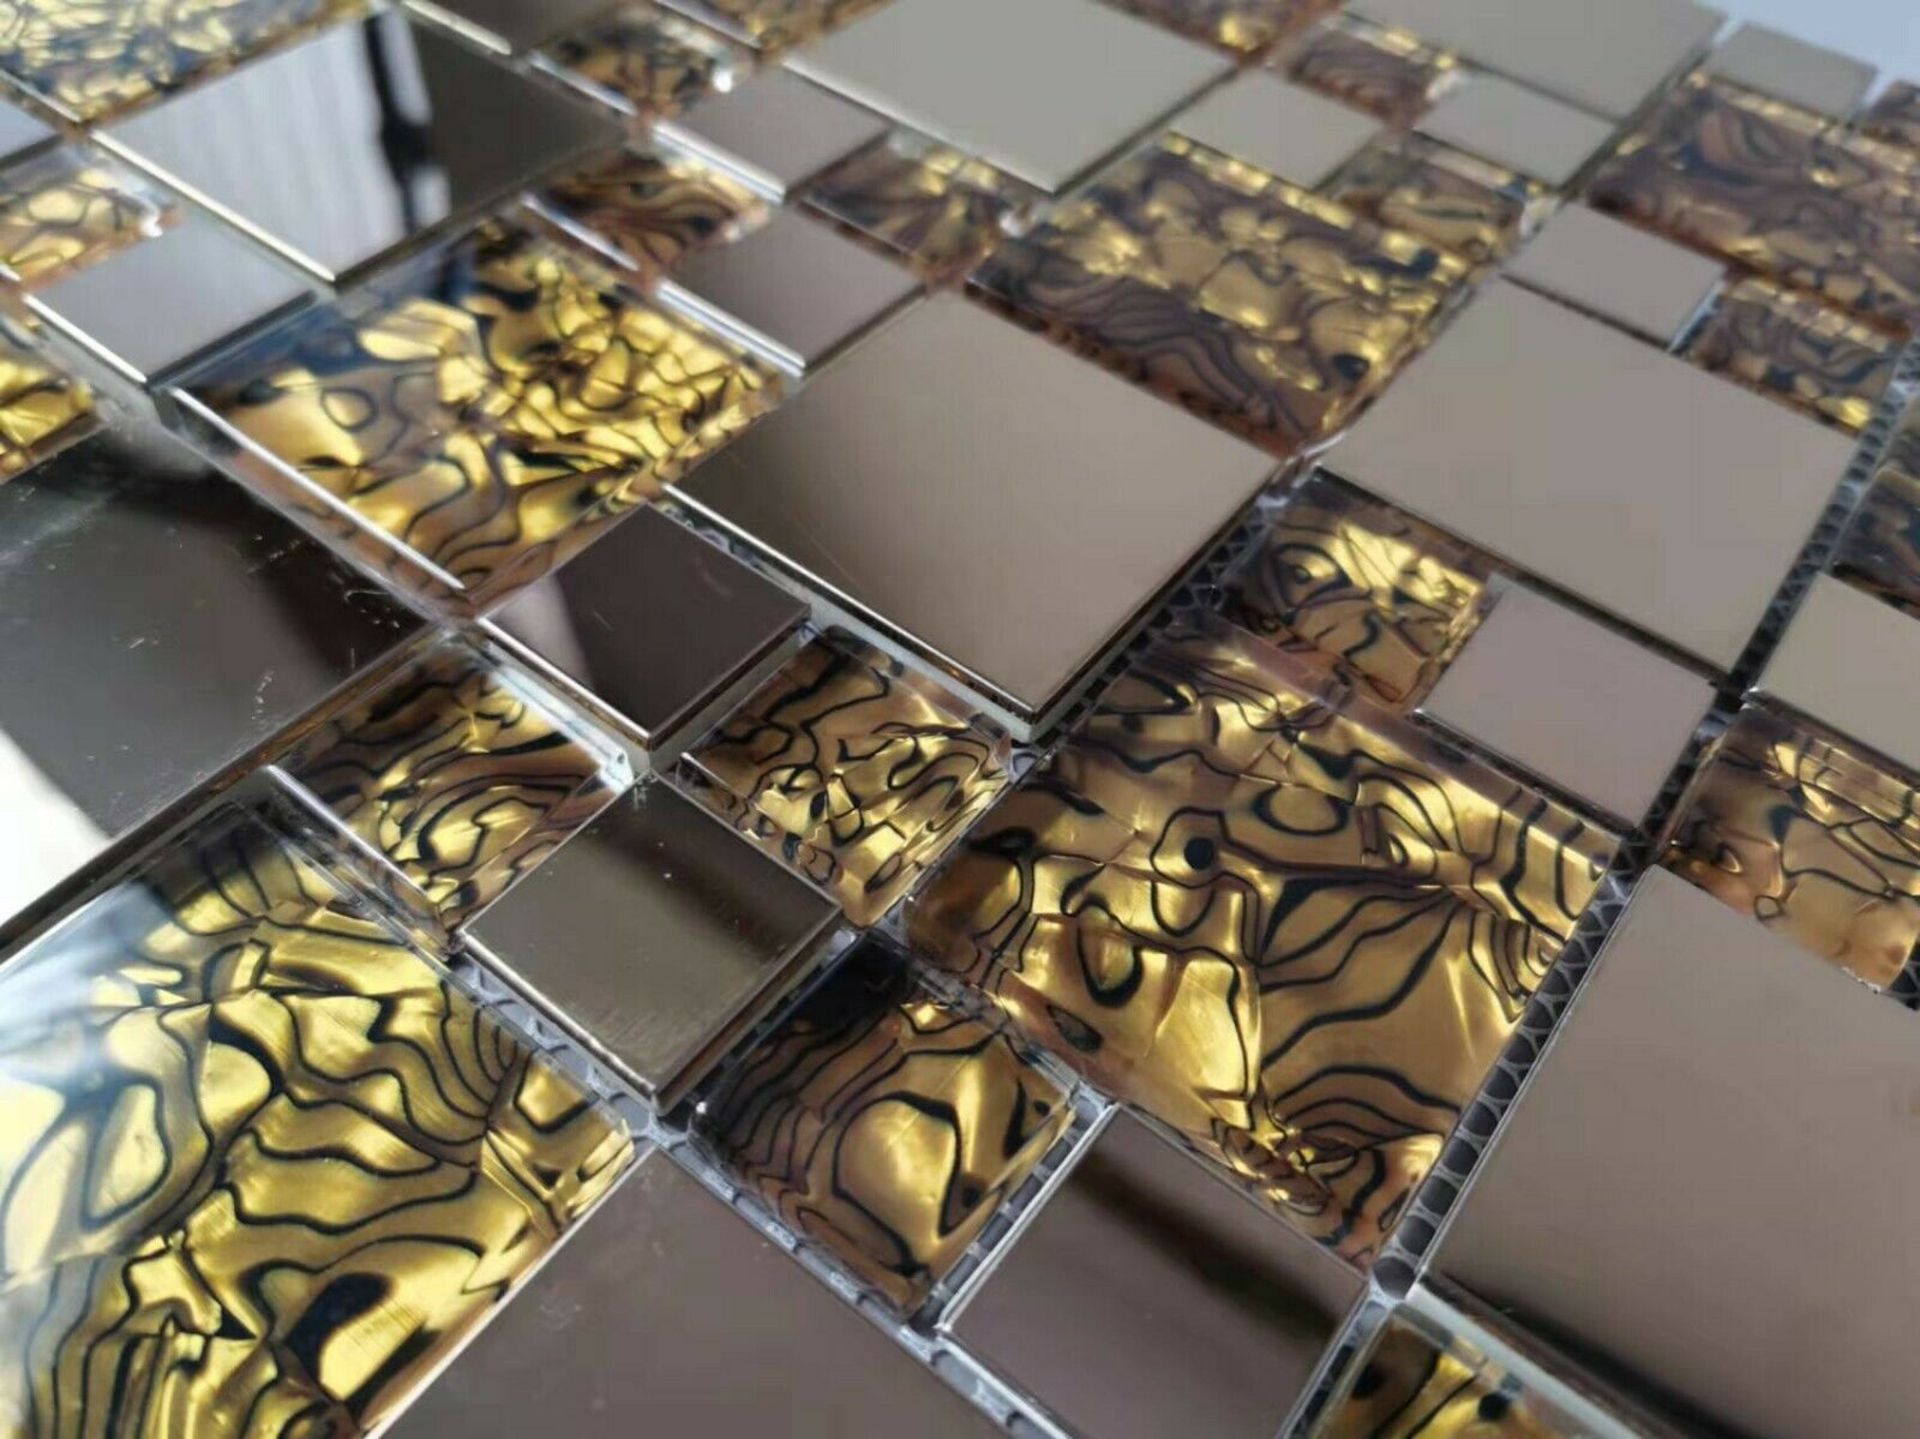 2 Square Metres-High Quality Glass/Stainless Steel Mosaic Tiles - Image 2 of 4